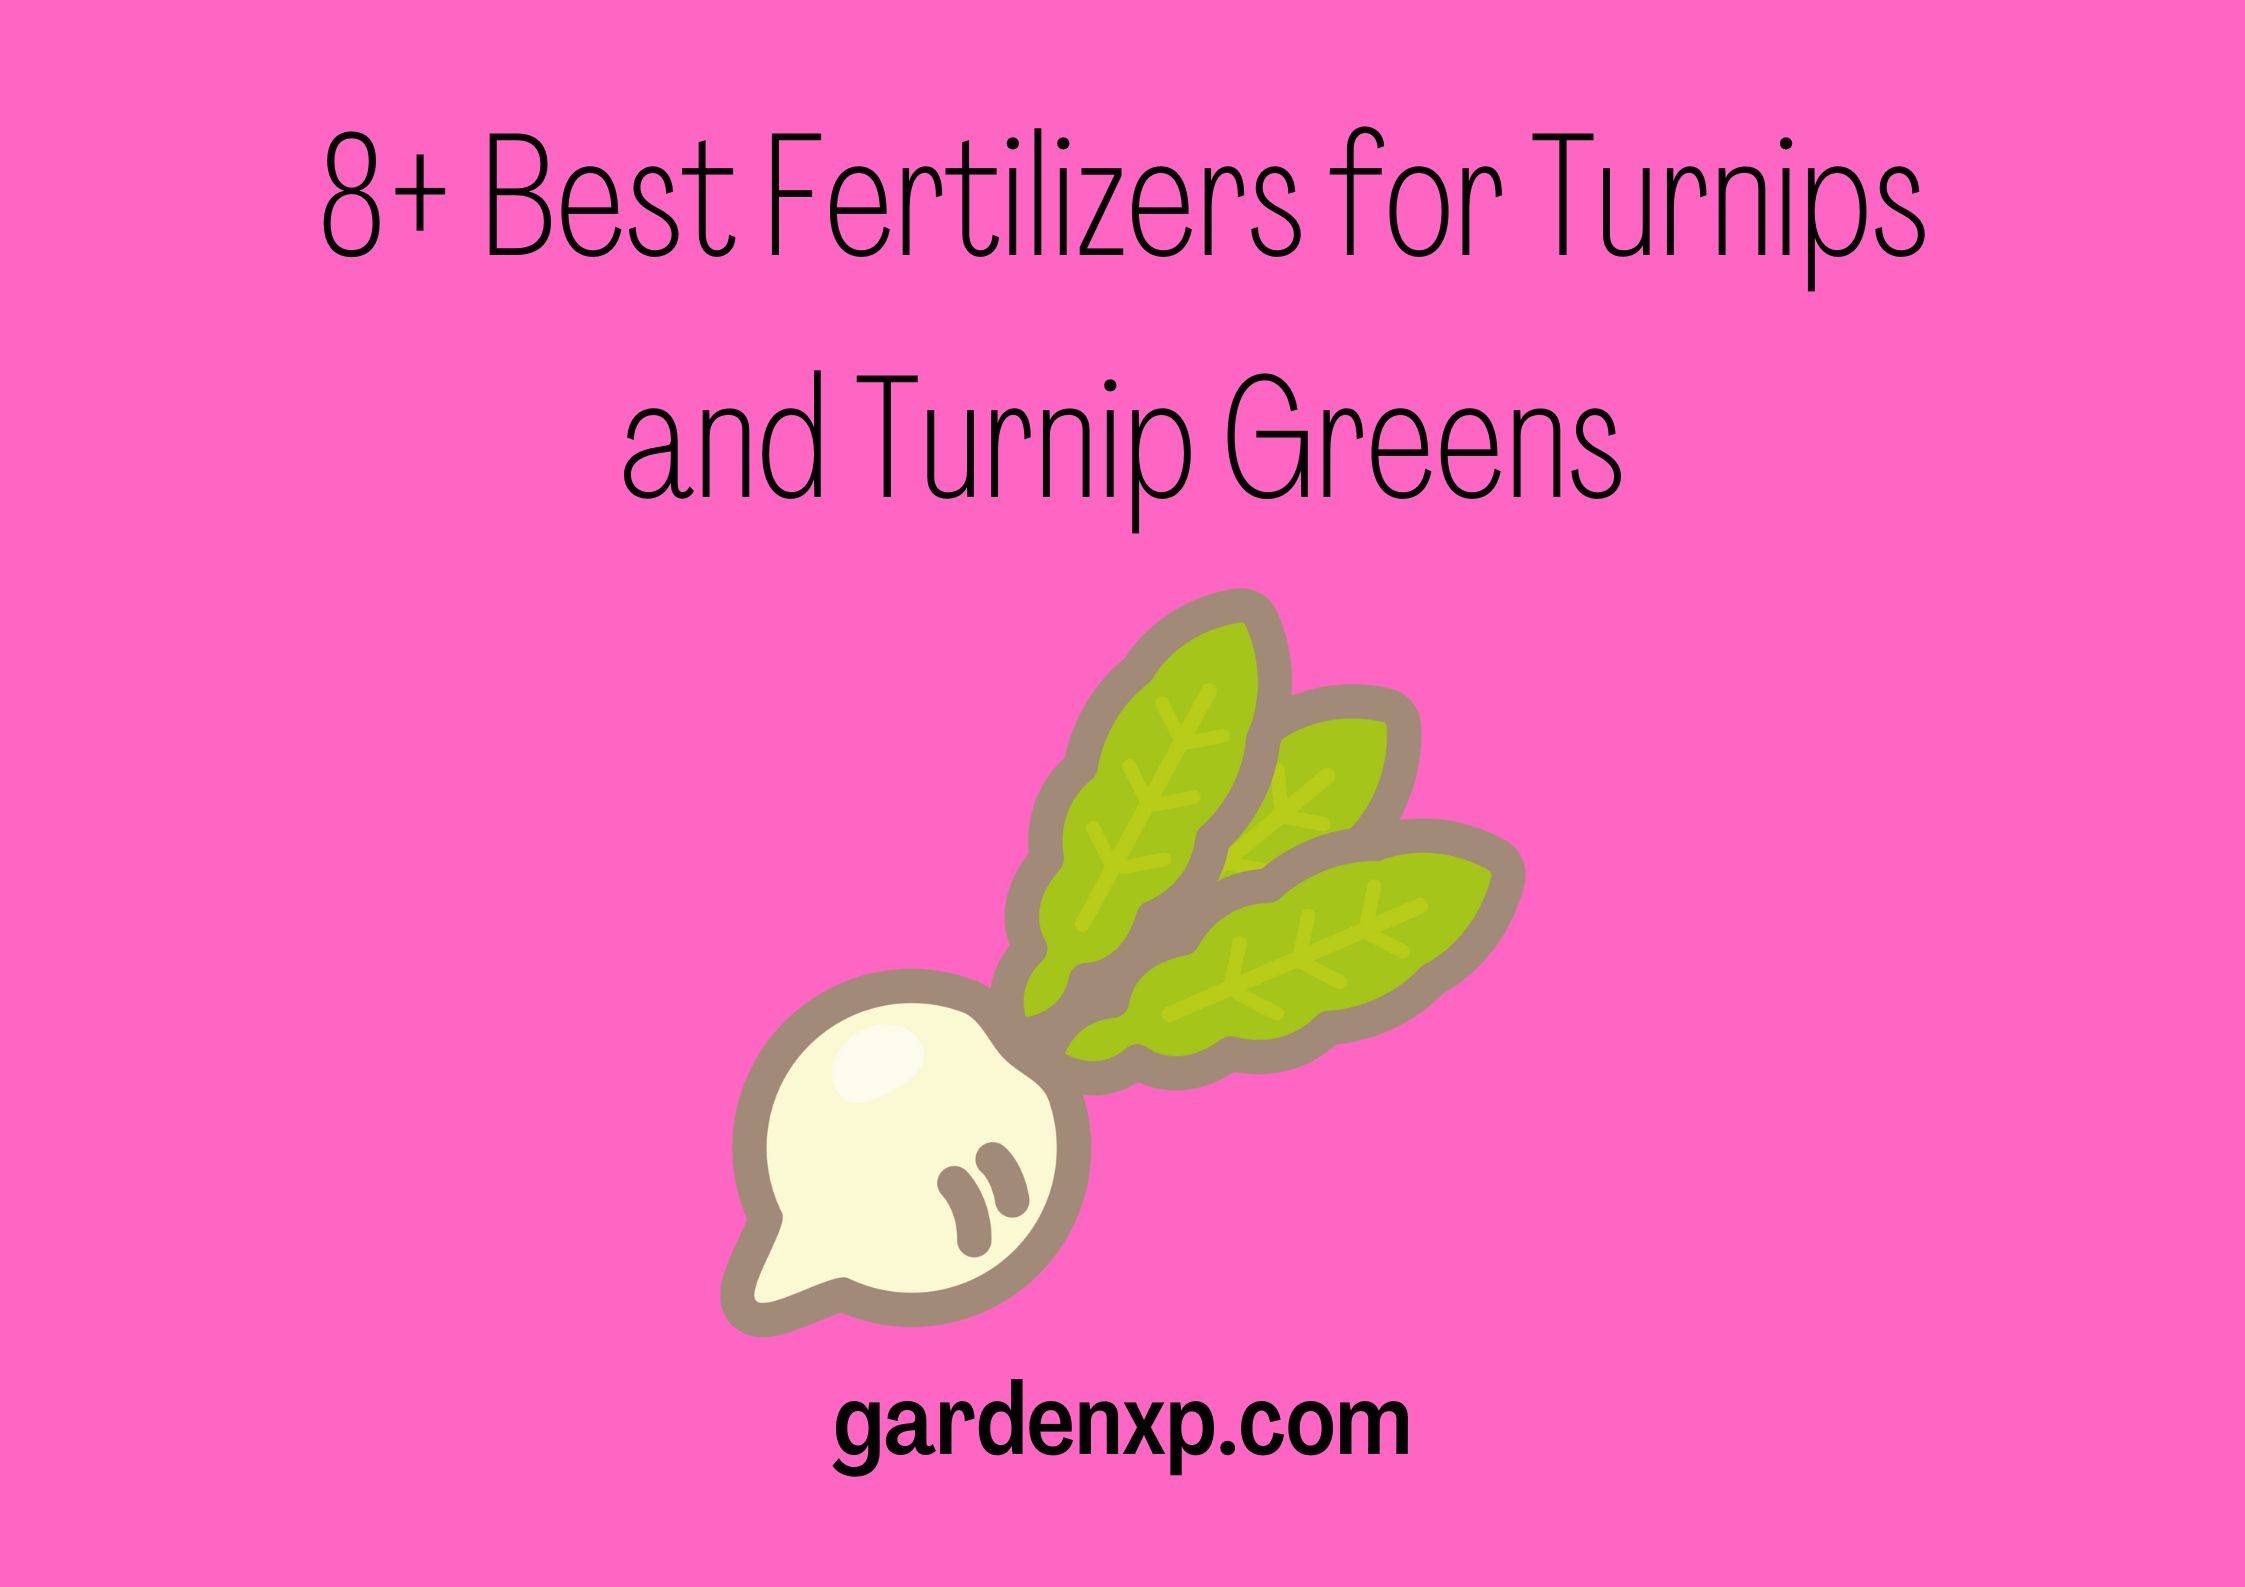 <strong>8+ Best Fertilizers for Turnips and Turnip Greens</strong>